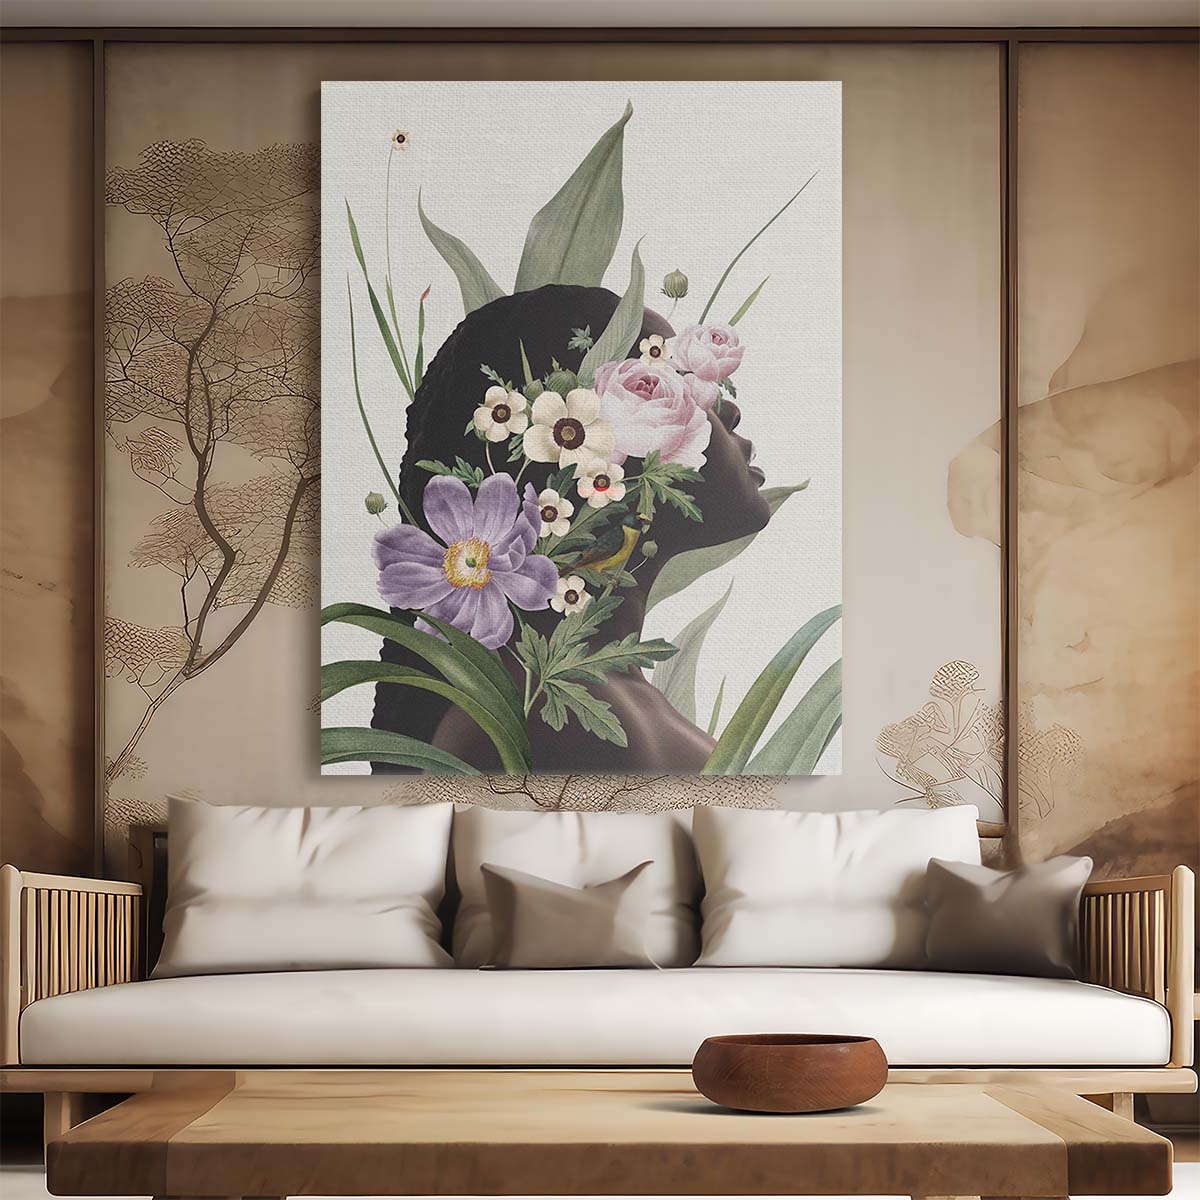 Botanical Collage Portrait of Beautiful Woman with Purple Roses by Luxuriance Designs, made in USA